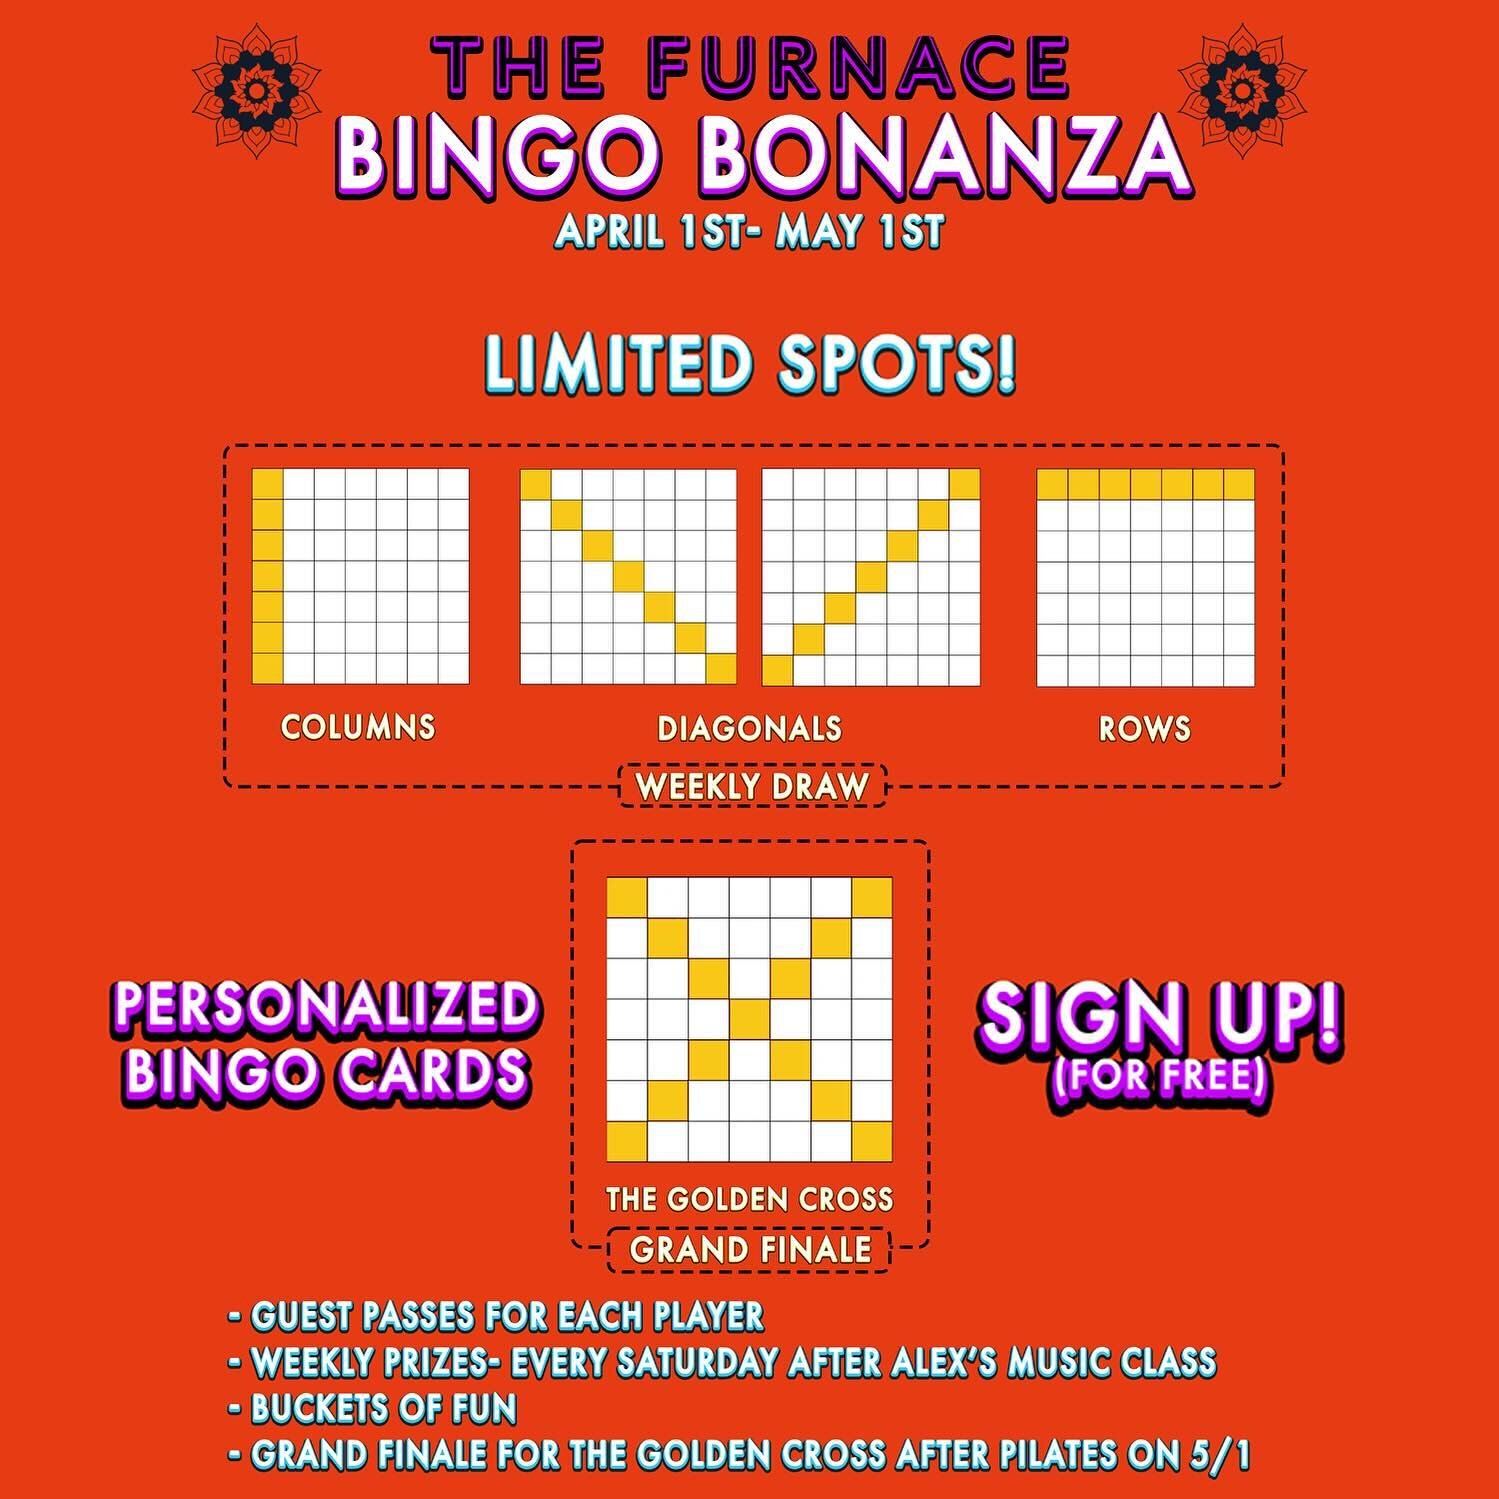 Our April Challenge is right around the corner!
It&rsquo;s going to be a blast!
Collect stamps for classes all month long, with weekly prizes and a Grand Finale!
Everyone playing will get Bingo Cards, Guest Passes, and bragging rights!
Sign up at the